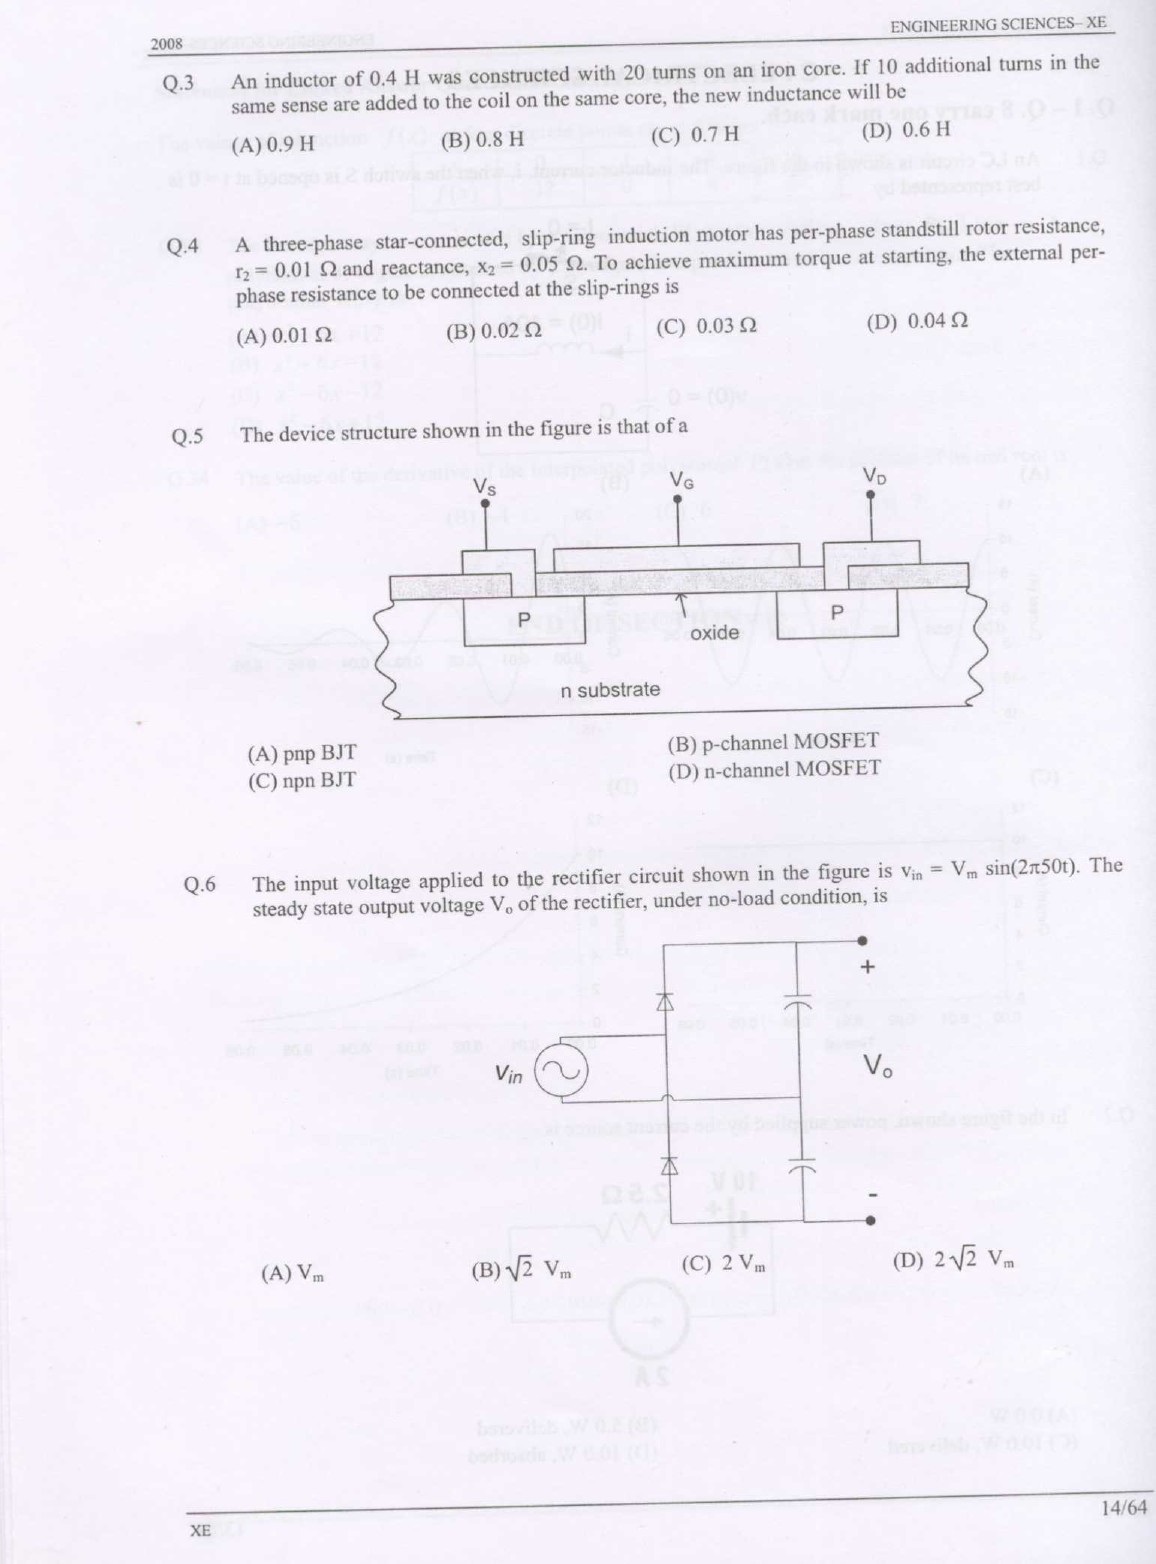 GATE Exam Question Paper 2008 Engineering Sciences 14